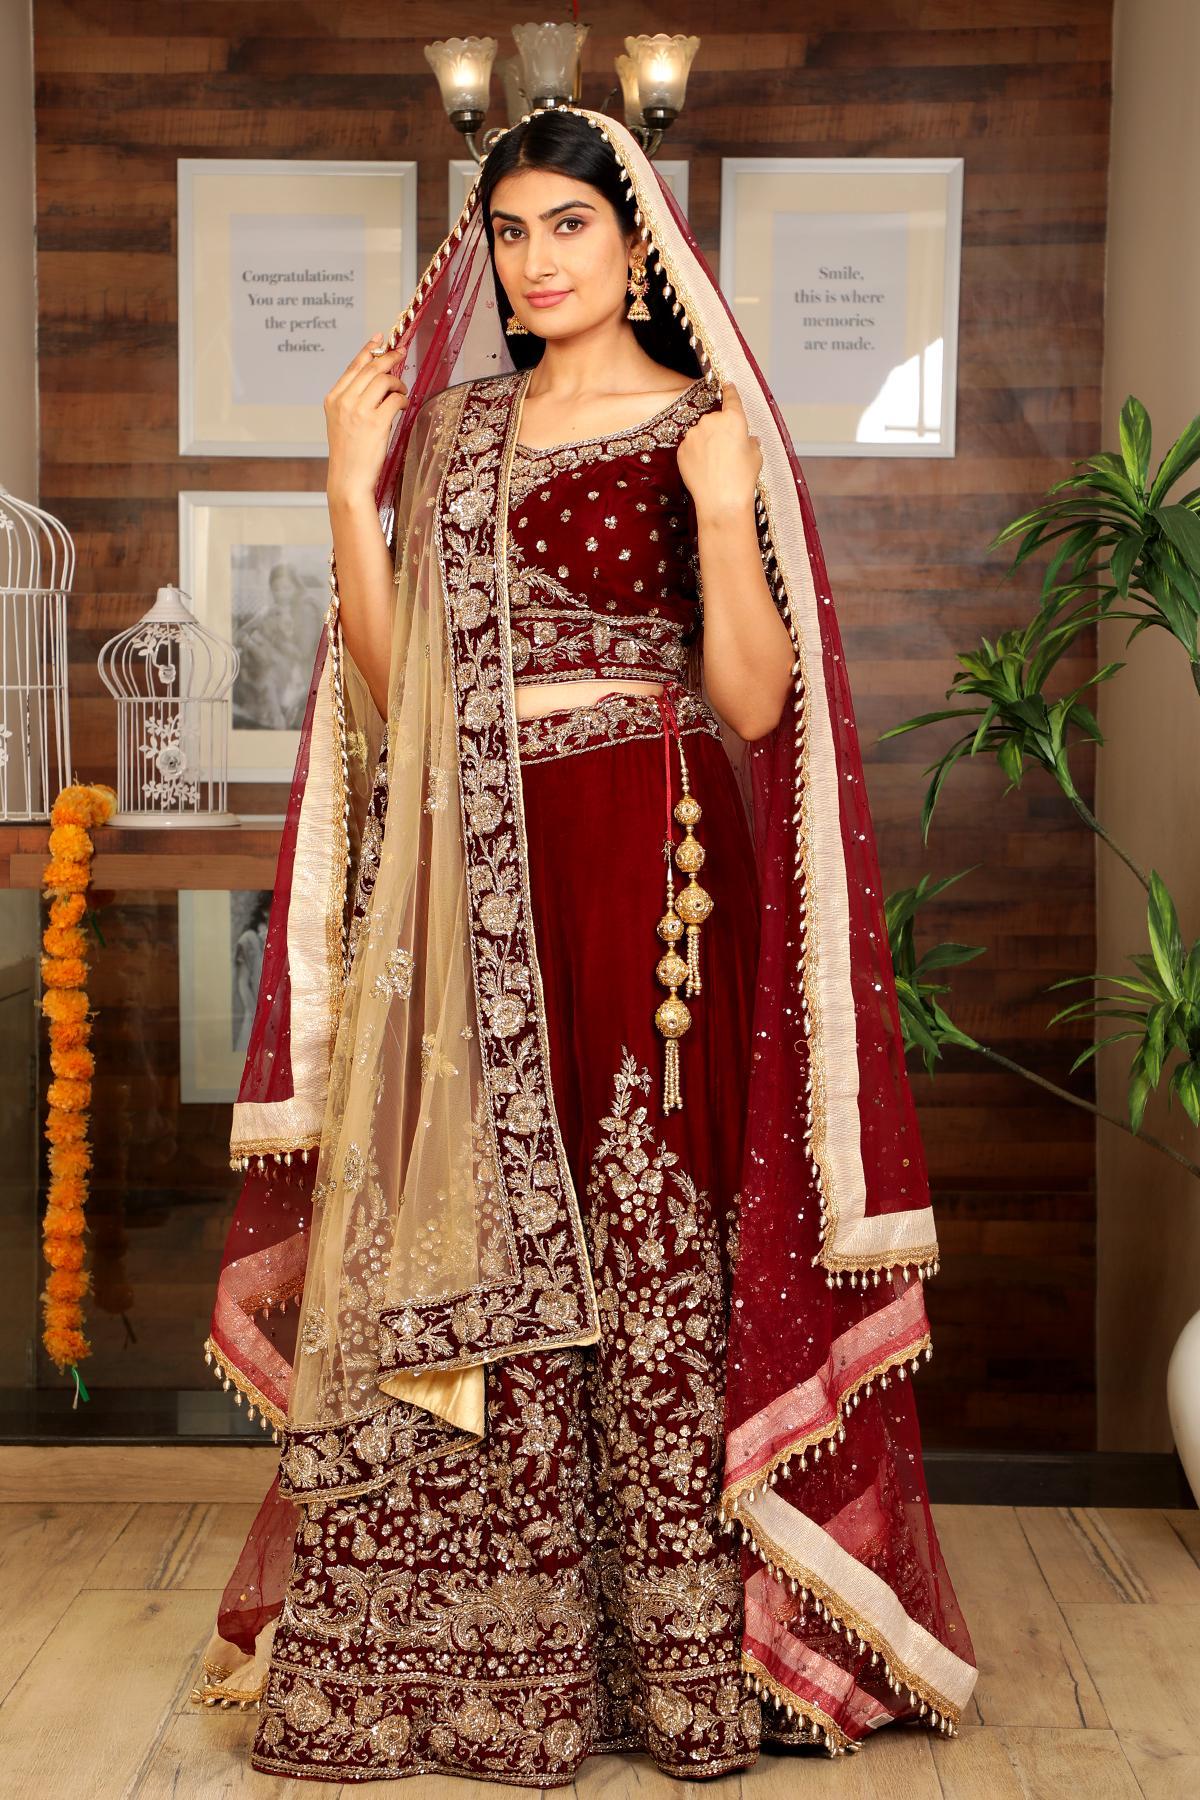 Beautiful Wine-red lehenga by Sabyasachi from his #devi collection | Индия